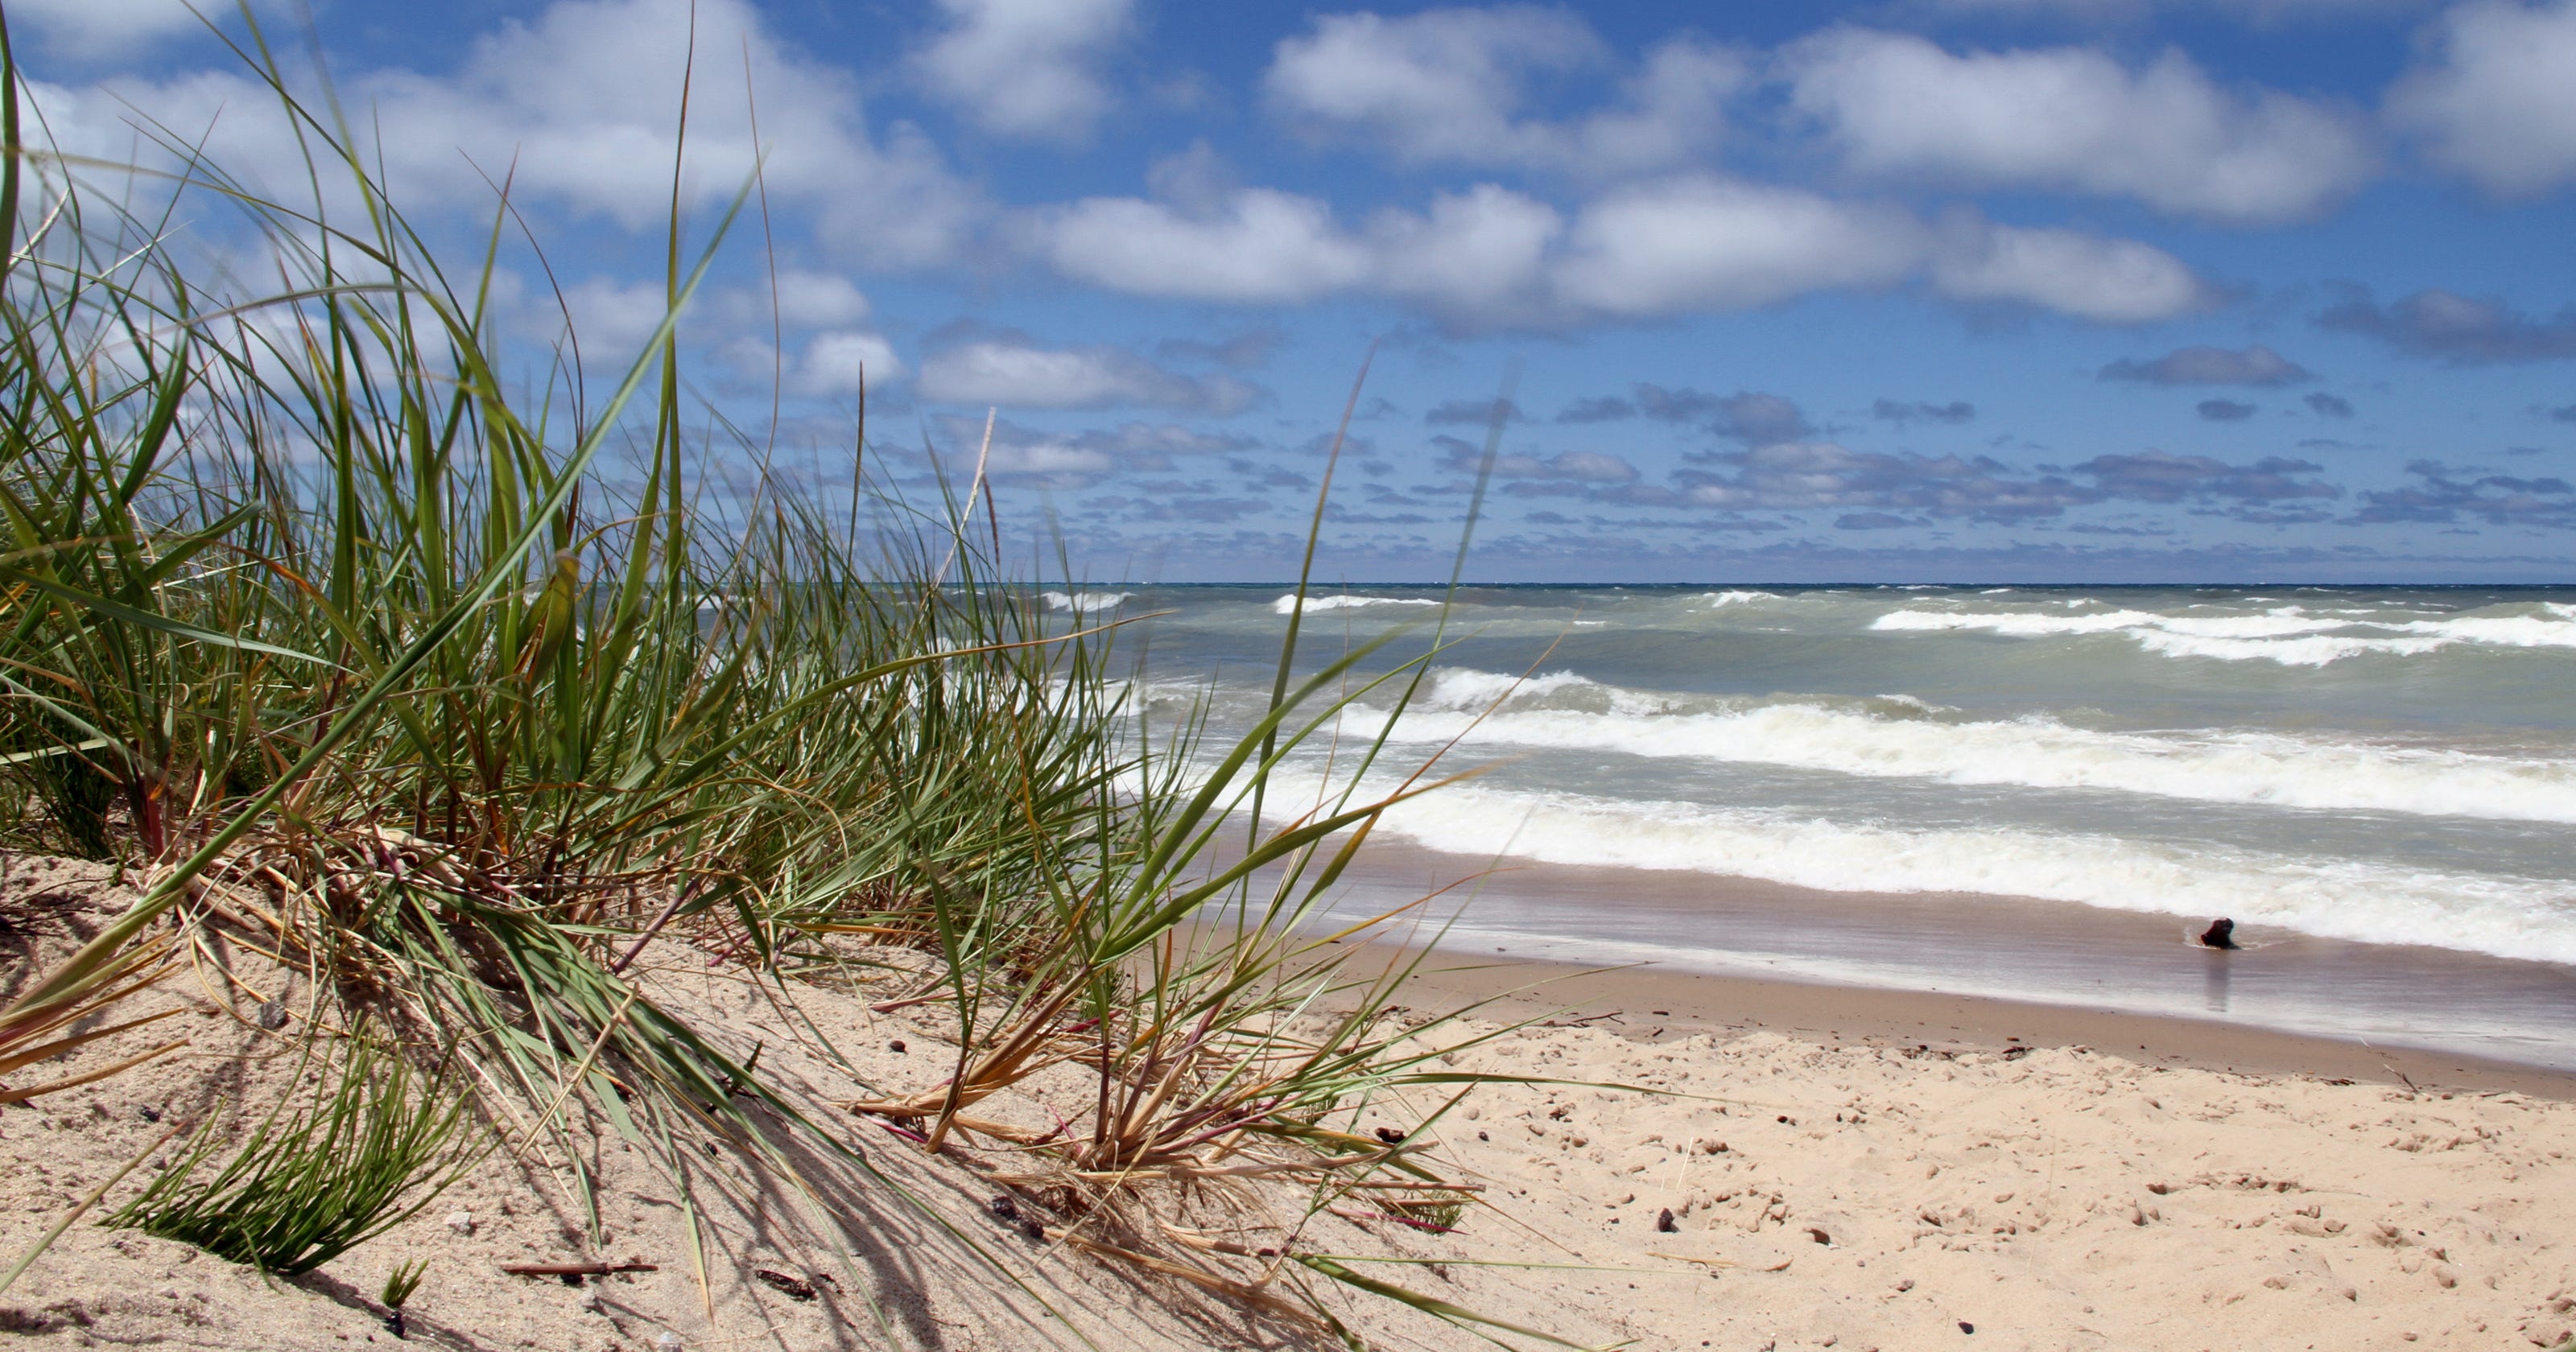 Indiana Dunes: You can now reserve campsites at Indiana Dunes National Park